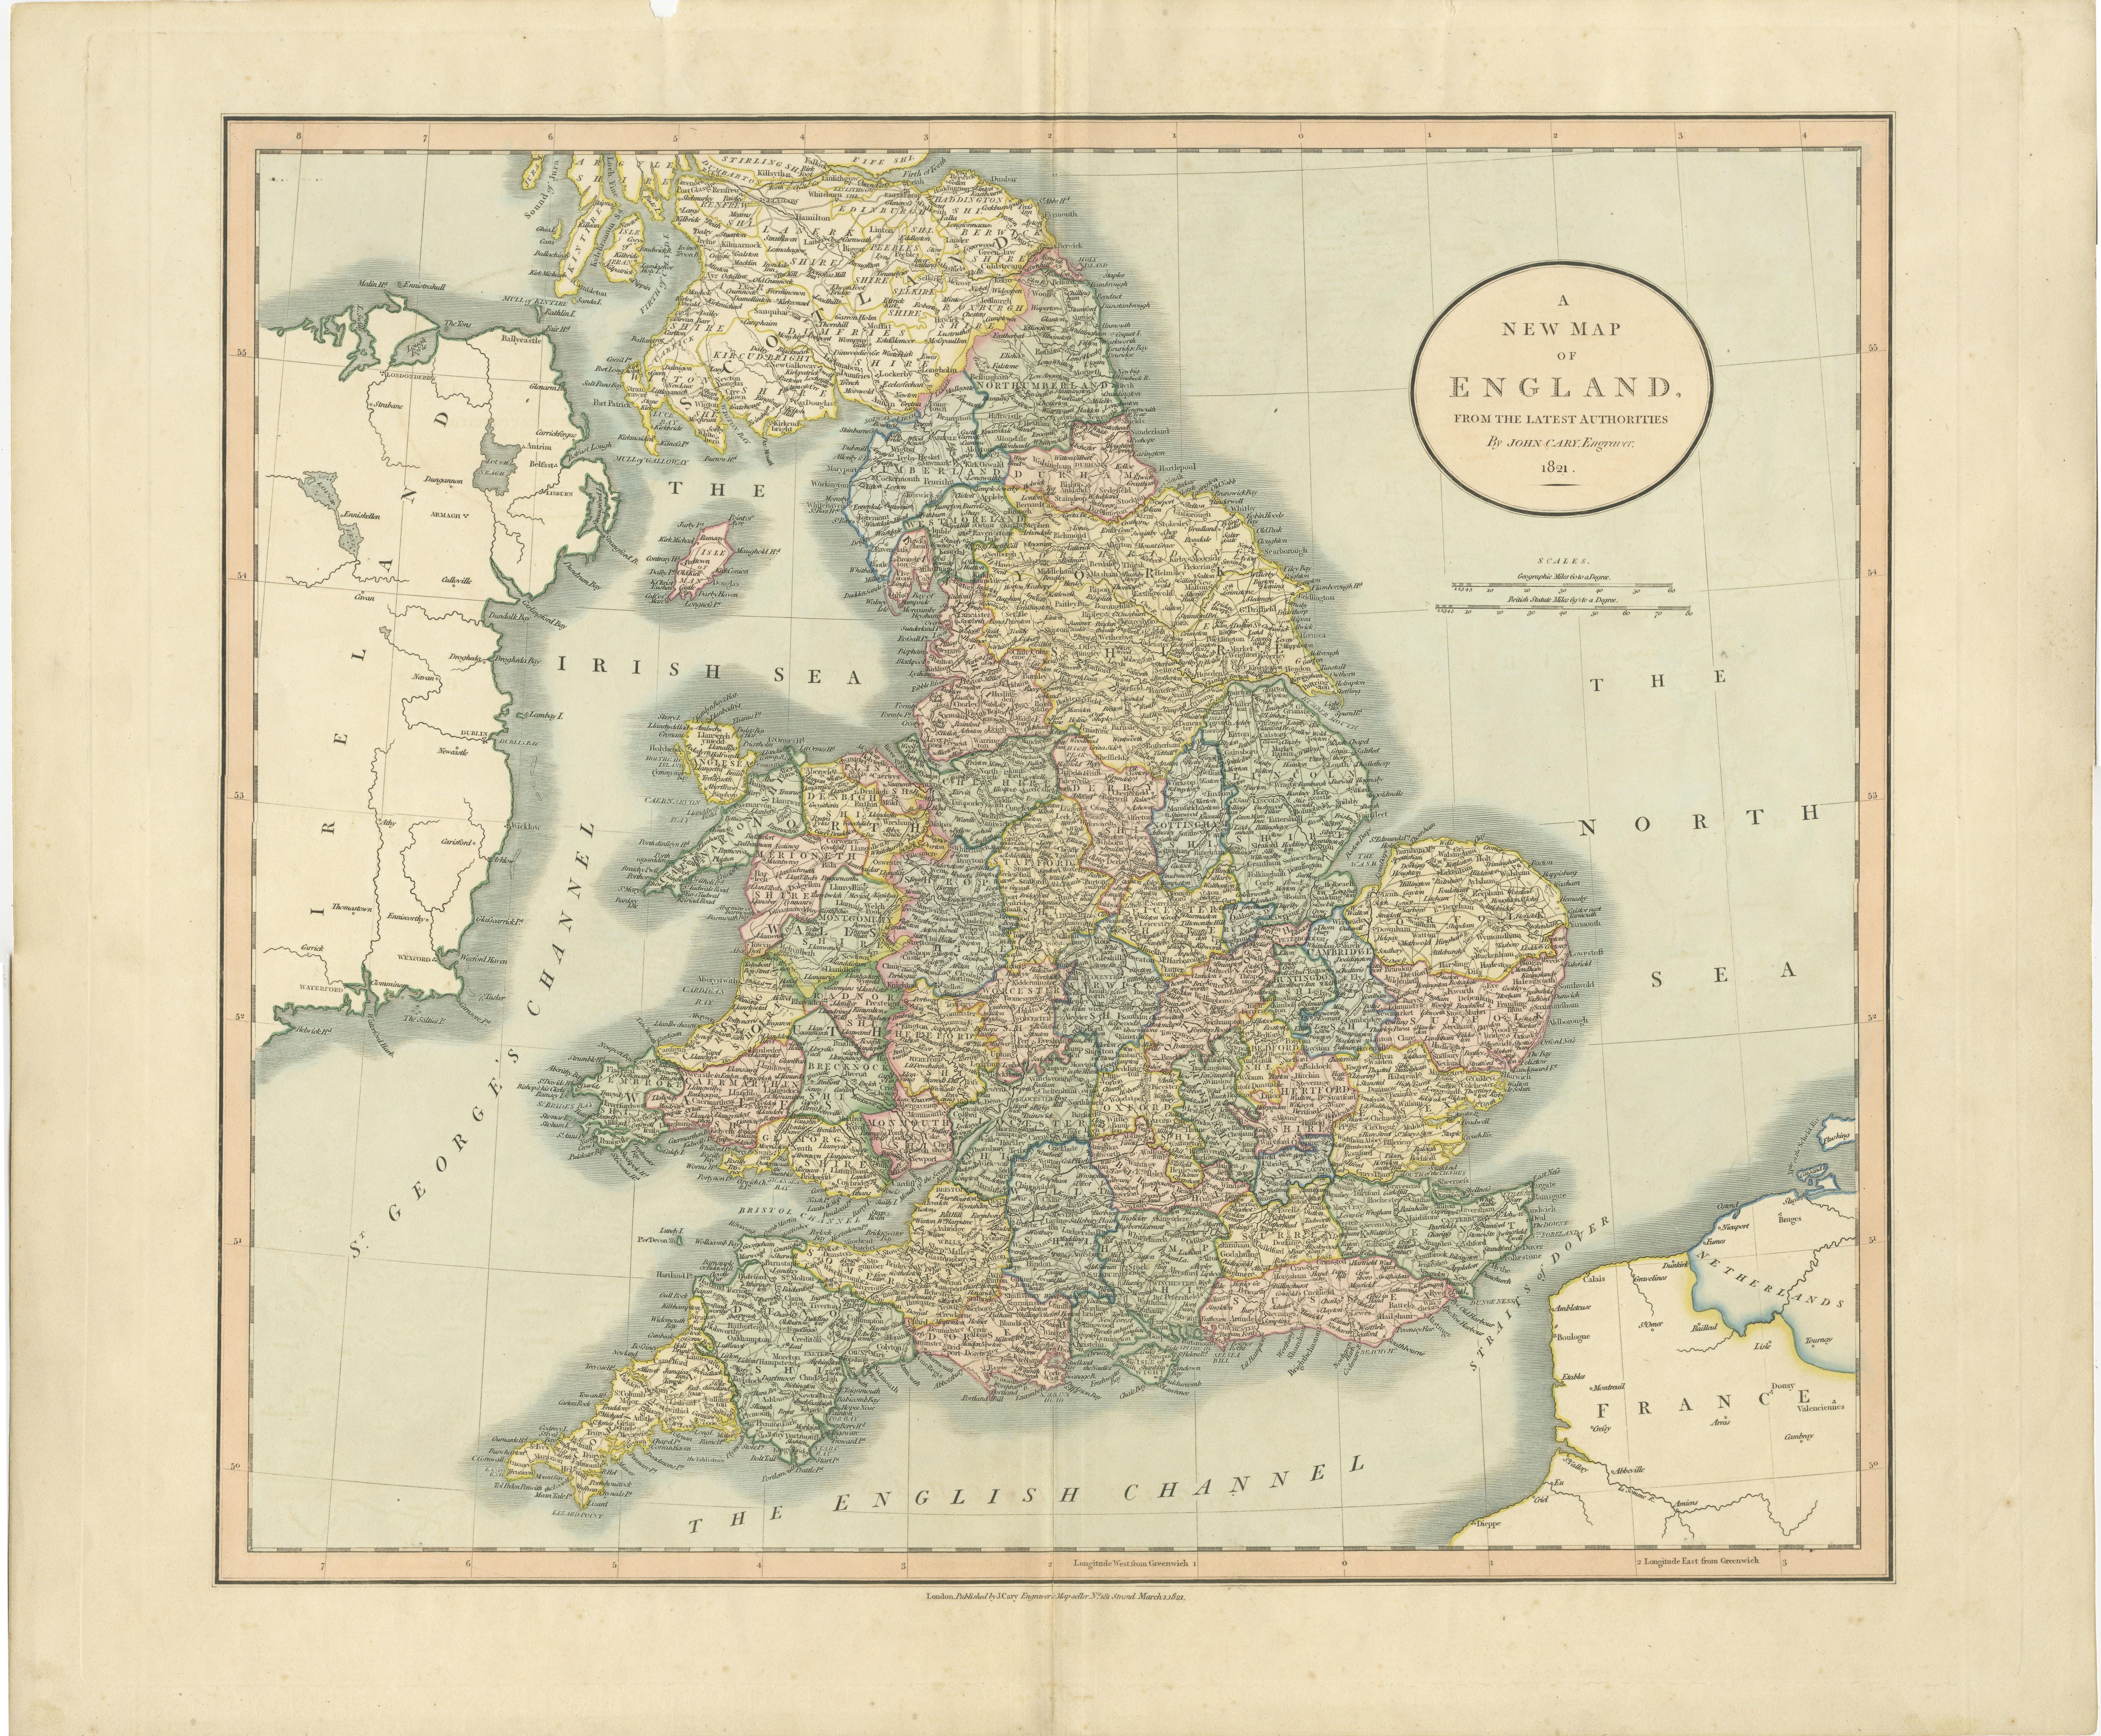 Antique map titled 'A New Map of England from the latest Authorities'. Large map of England, hand colored by counties. Published by John Cary, 1821. 

John Cary (1755-1835) was a British cartographer and publisher best known for his clean